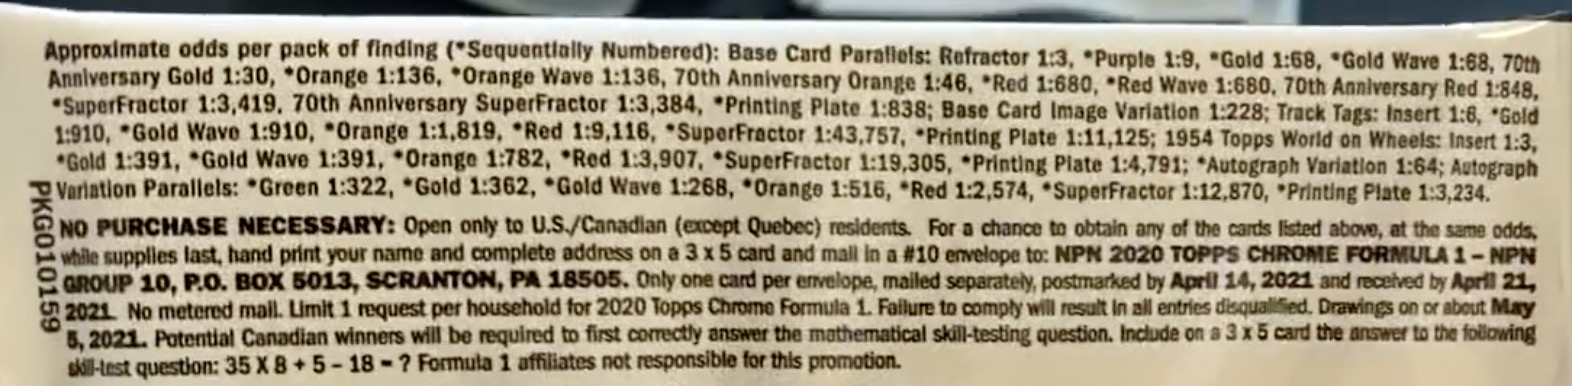 2020 Topps Chrome Formula 1 Racing Cards - Hobby Box - No Purchase Necessary (NPN) Information